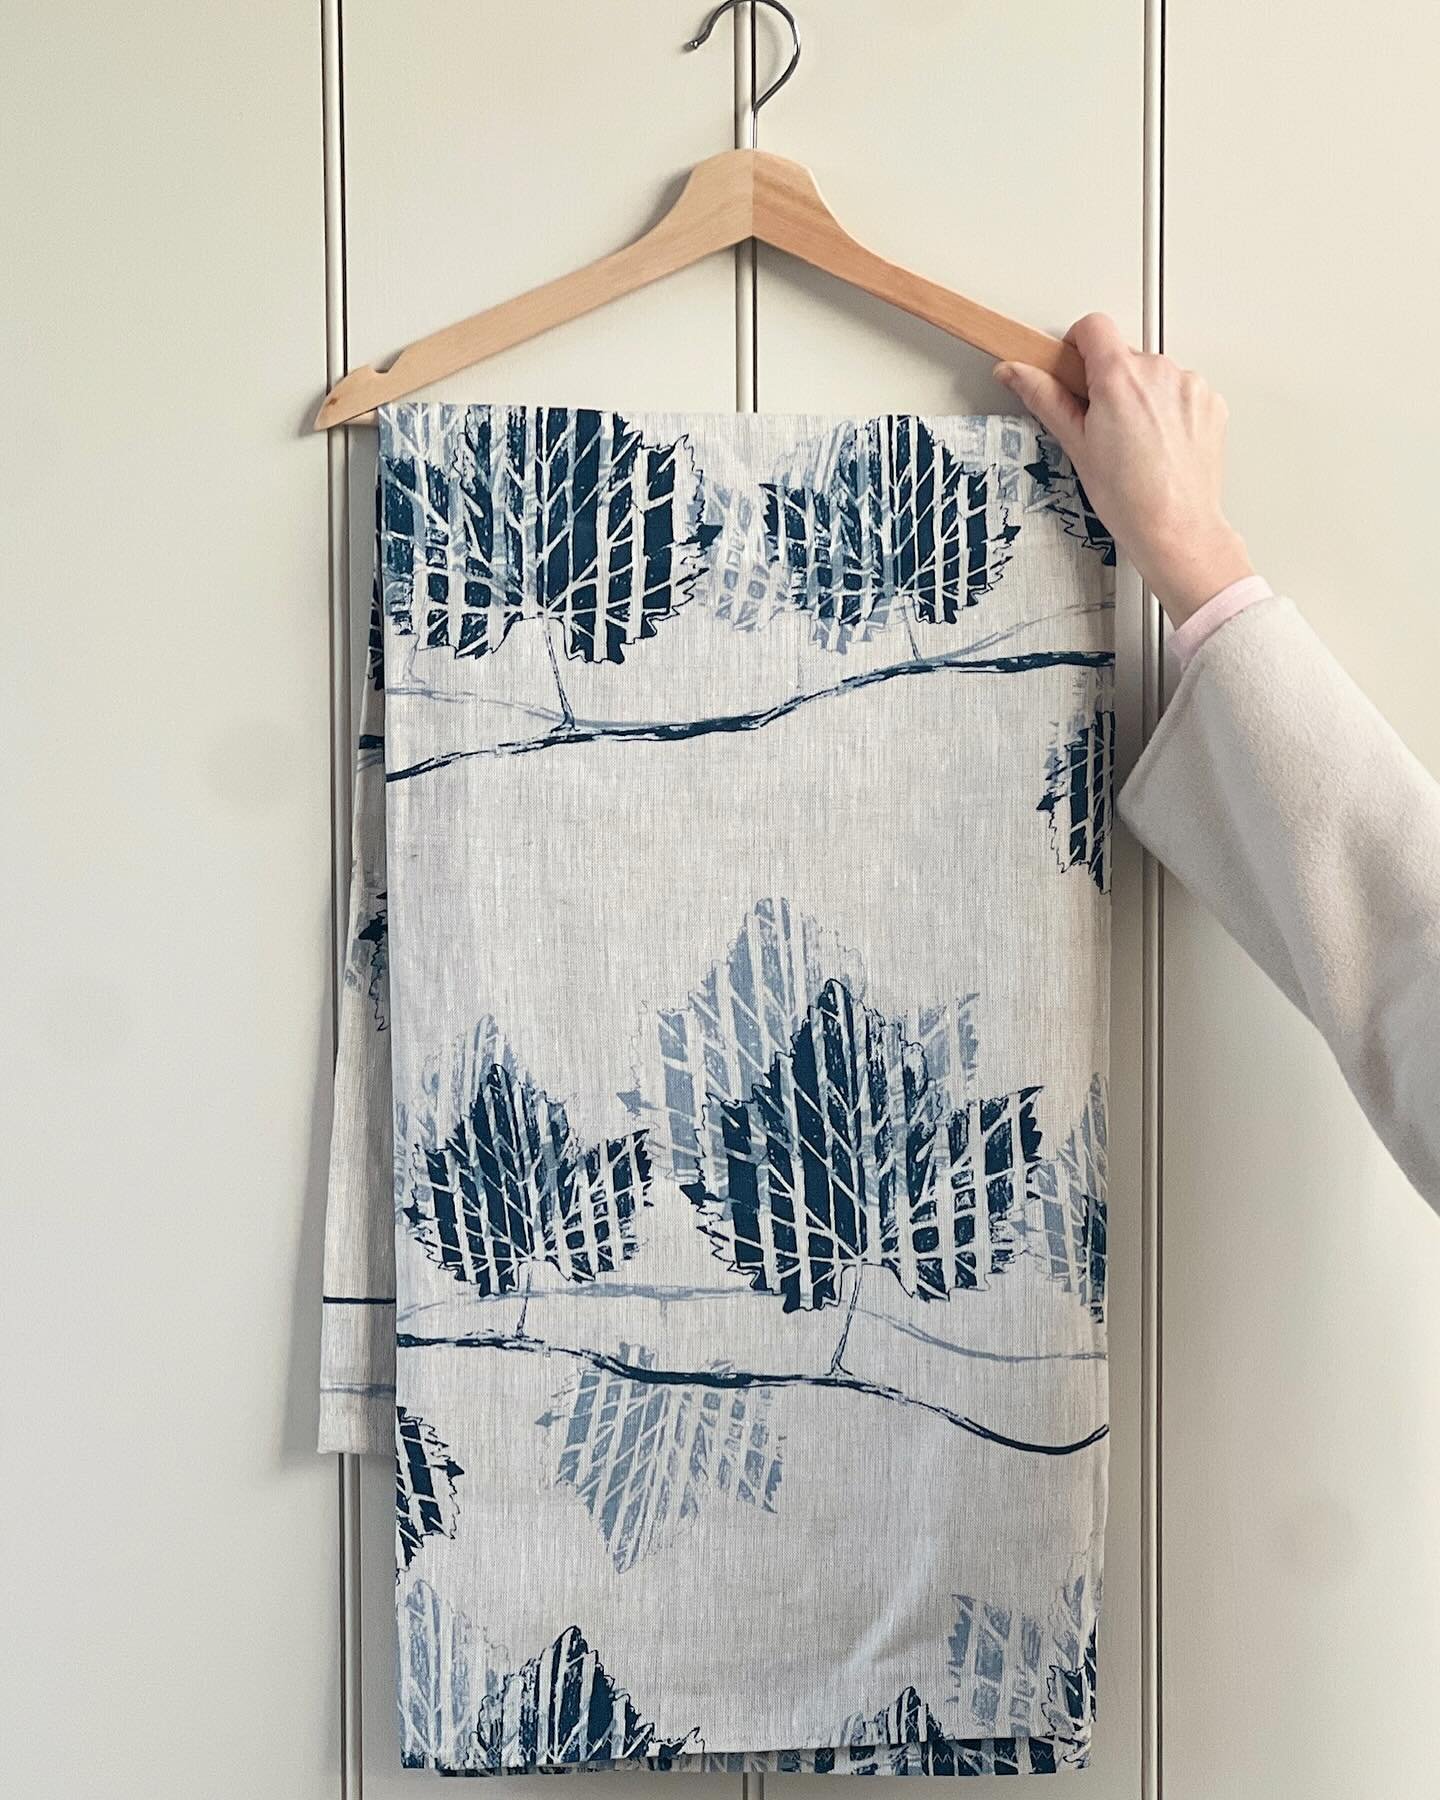 Building a room scheme around a favourite printed linen is a great place to start. 

Whether you&rsquo;re choosing fabric for curtains or blinds the Les Vignes print (Vivre Le R&ecirc;ve Collection) adds a touch of modern rustic, rural French charm. 